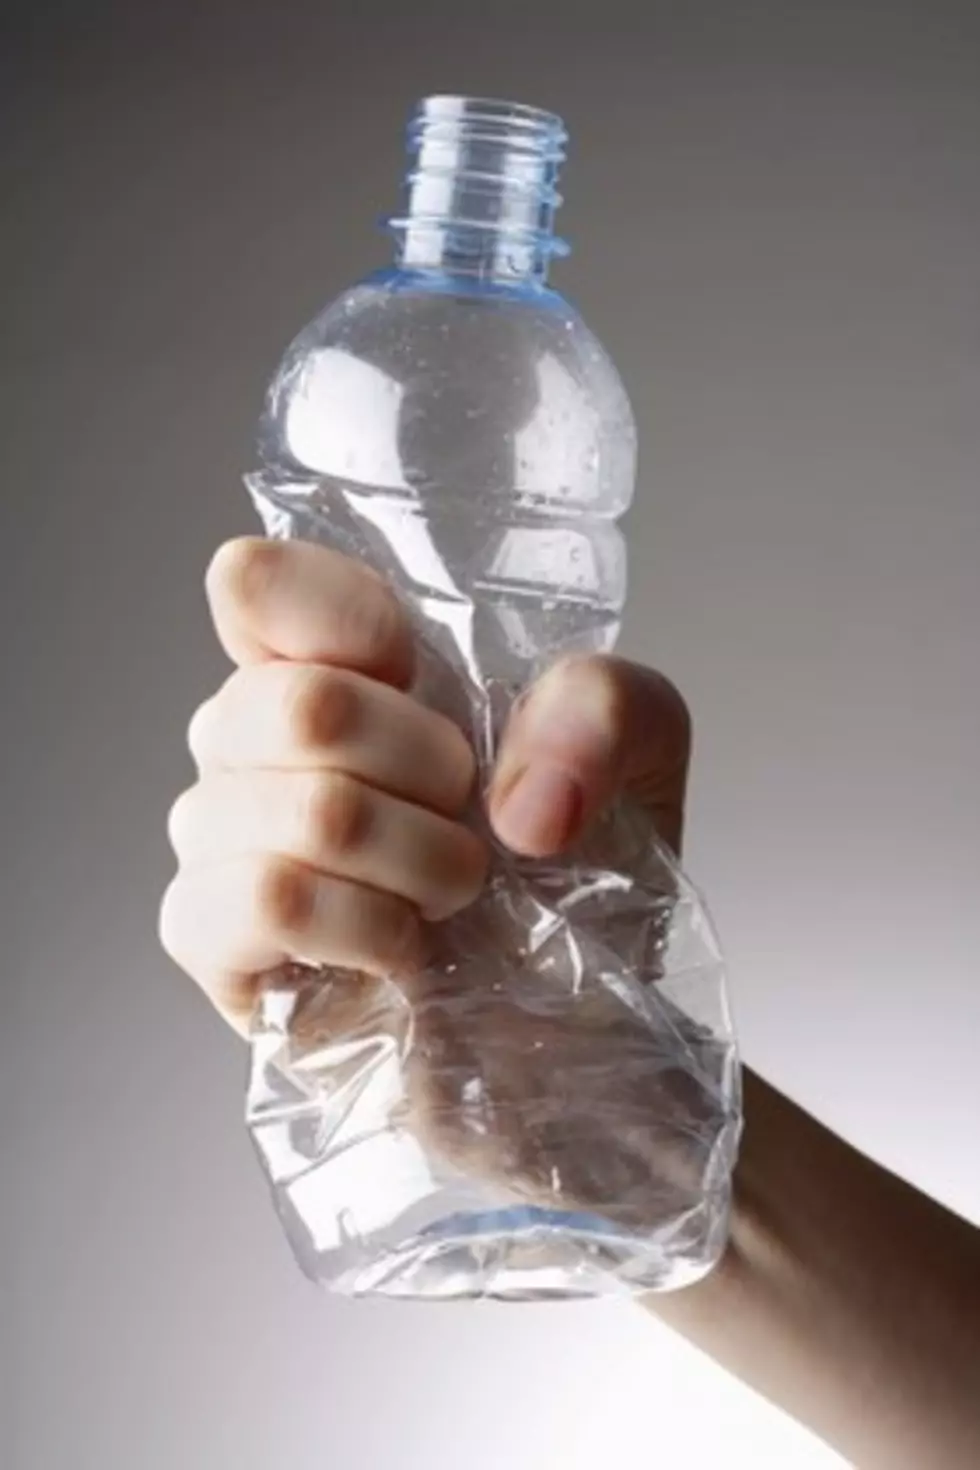 Have You Ever Heard Of The Water Bottle Trick? [VIDEO]